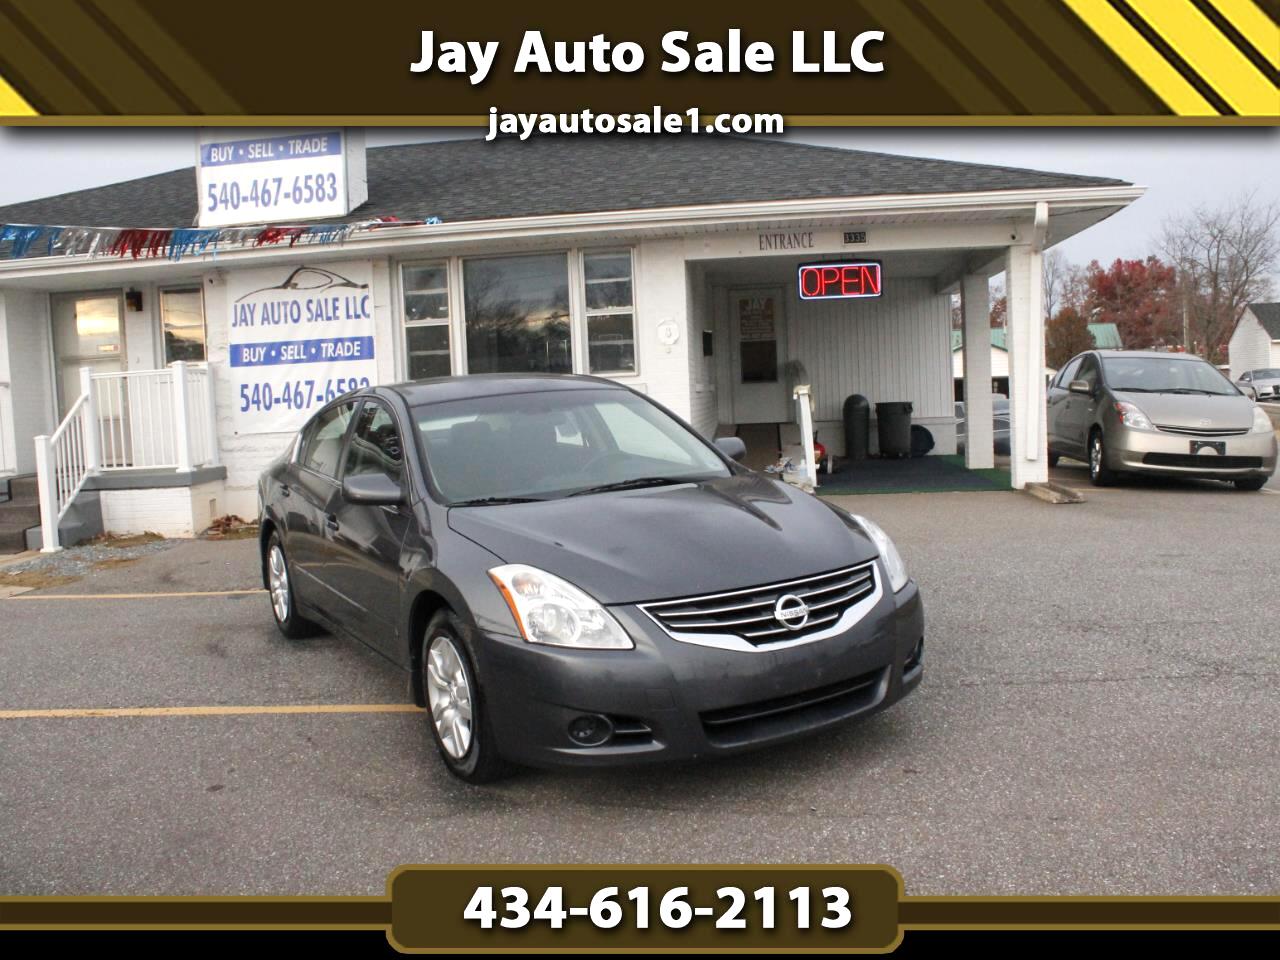 Used 2010 Nissan Altima 4dr Sdn I4 Cvt 2 5 S For Sale In